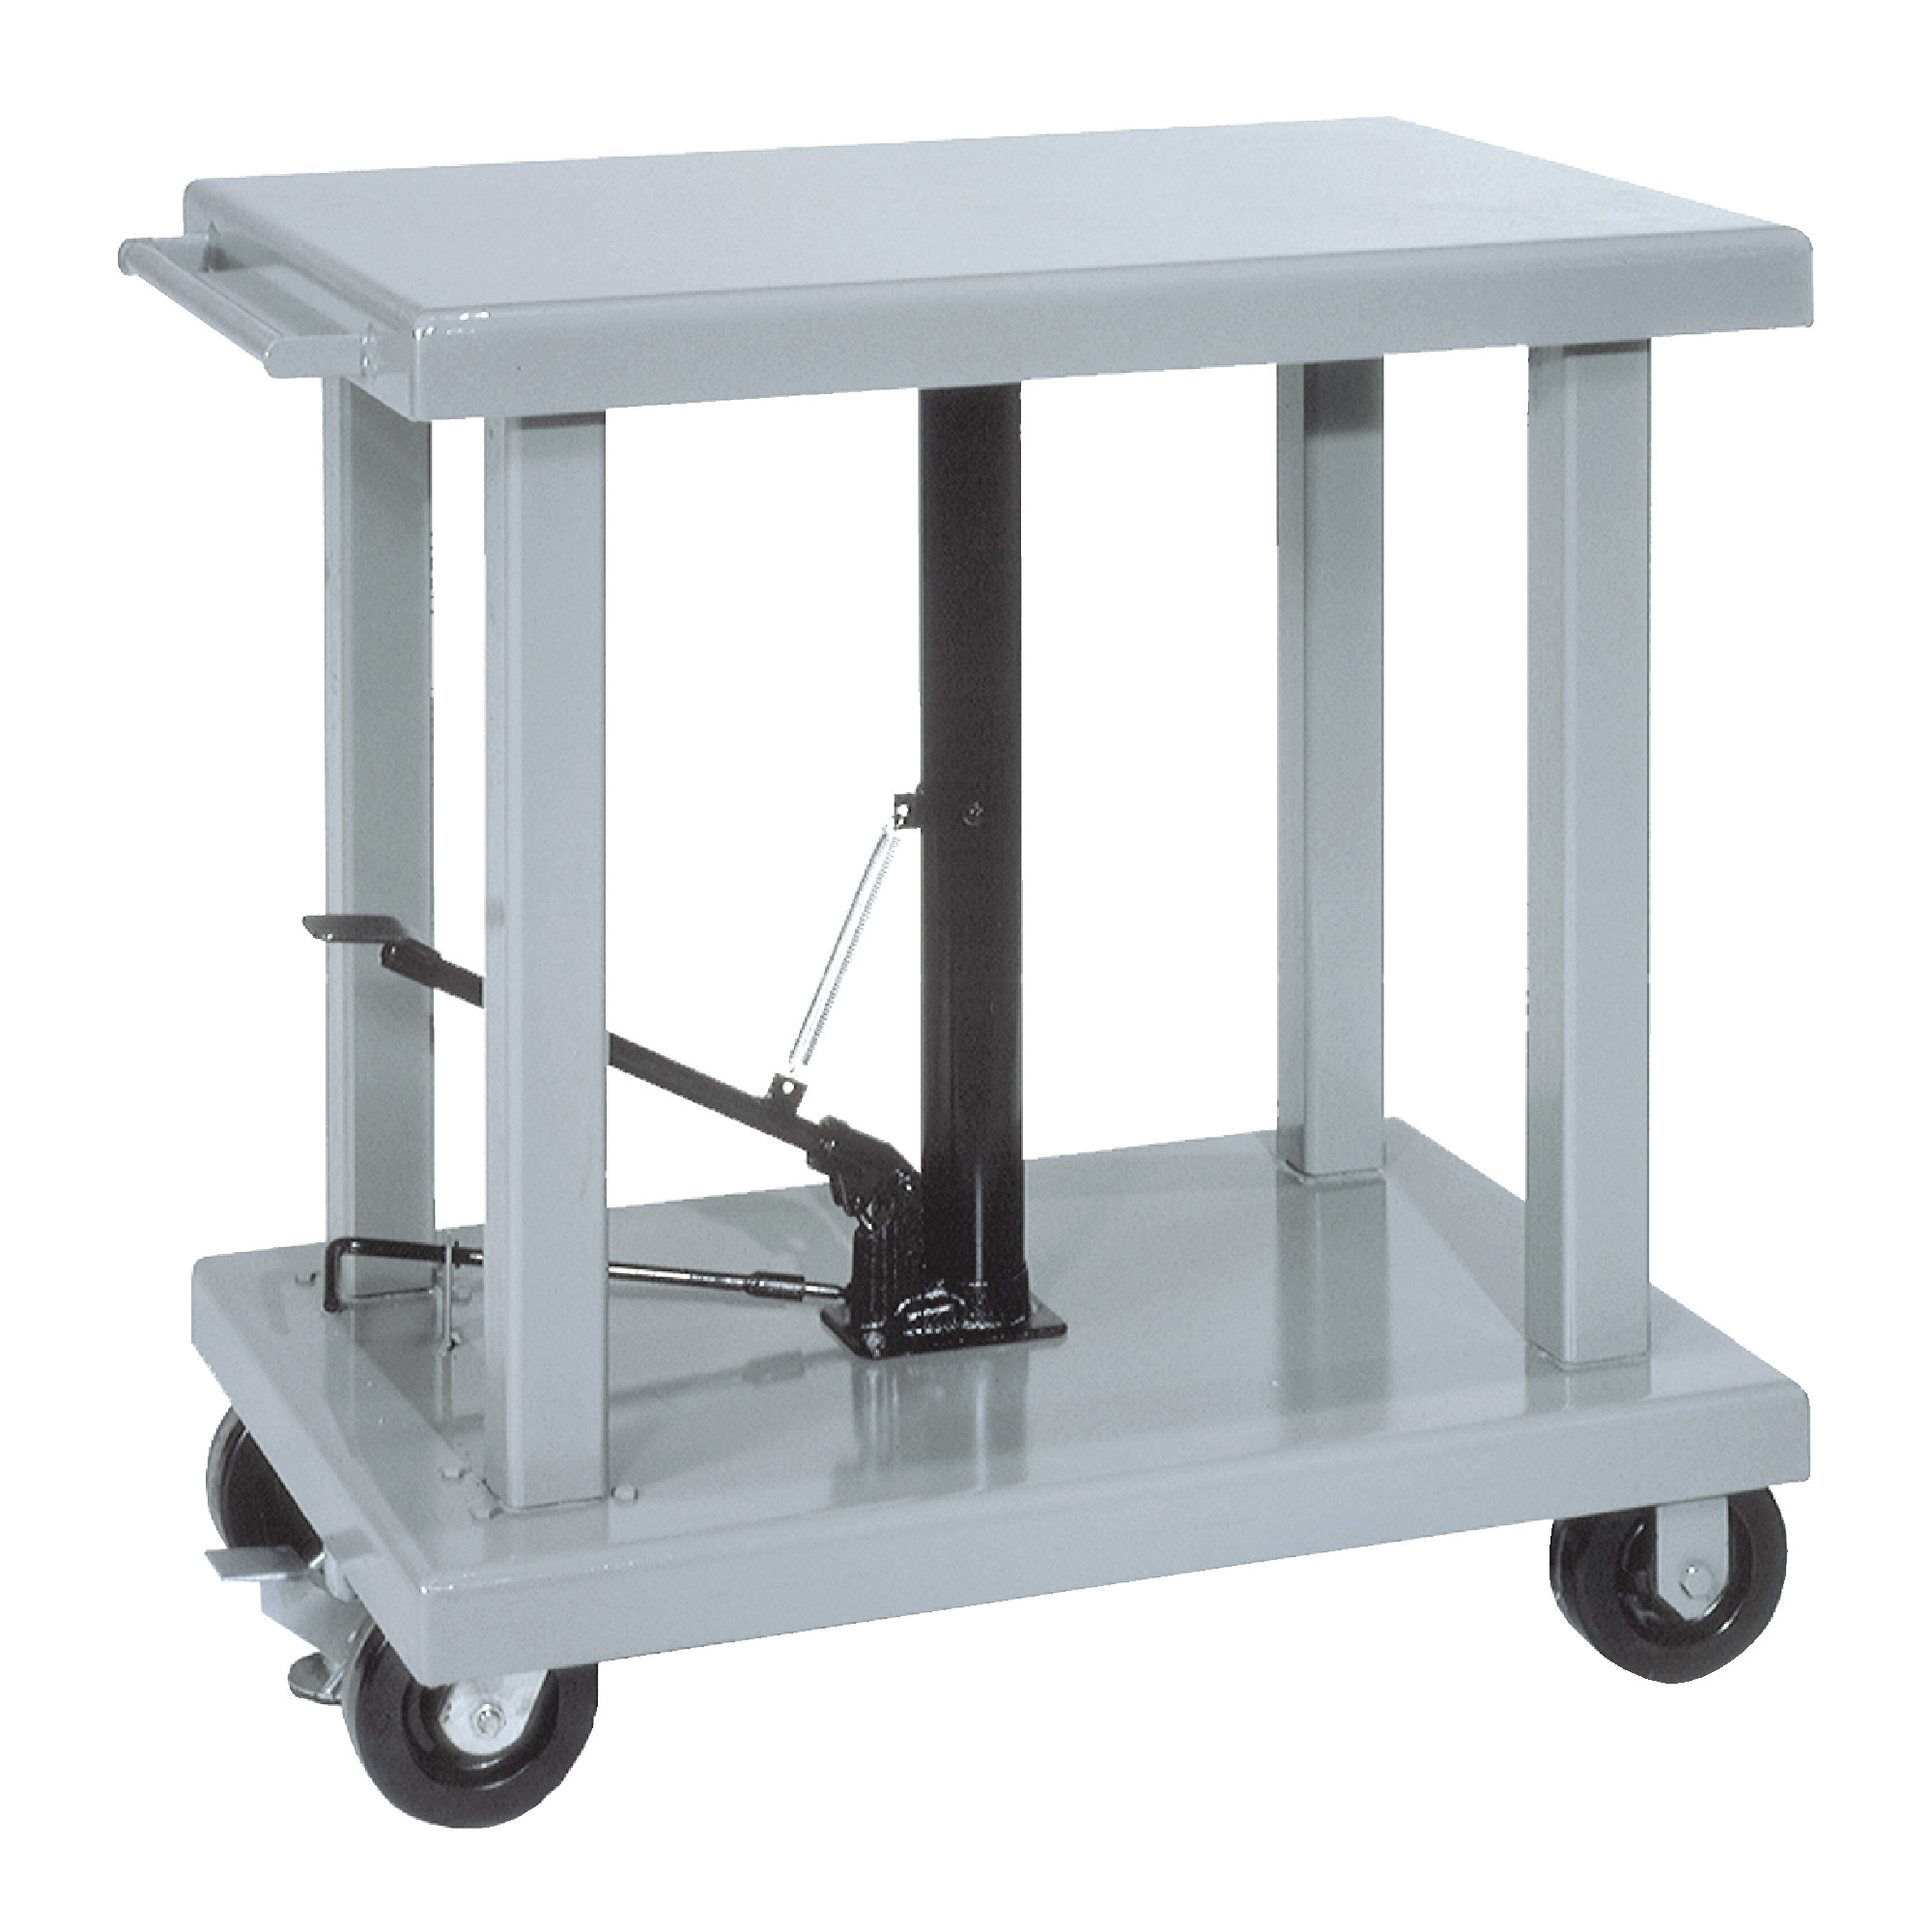 Foot Operated Hydraulic Lift Table